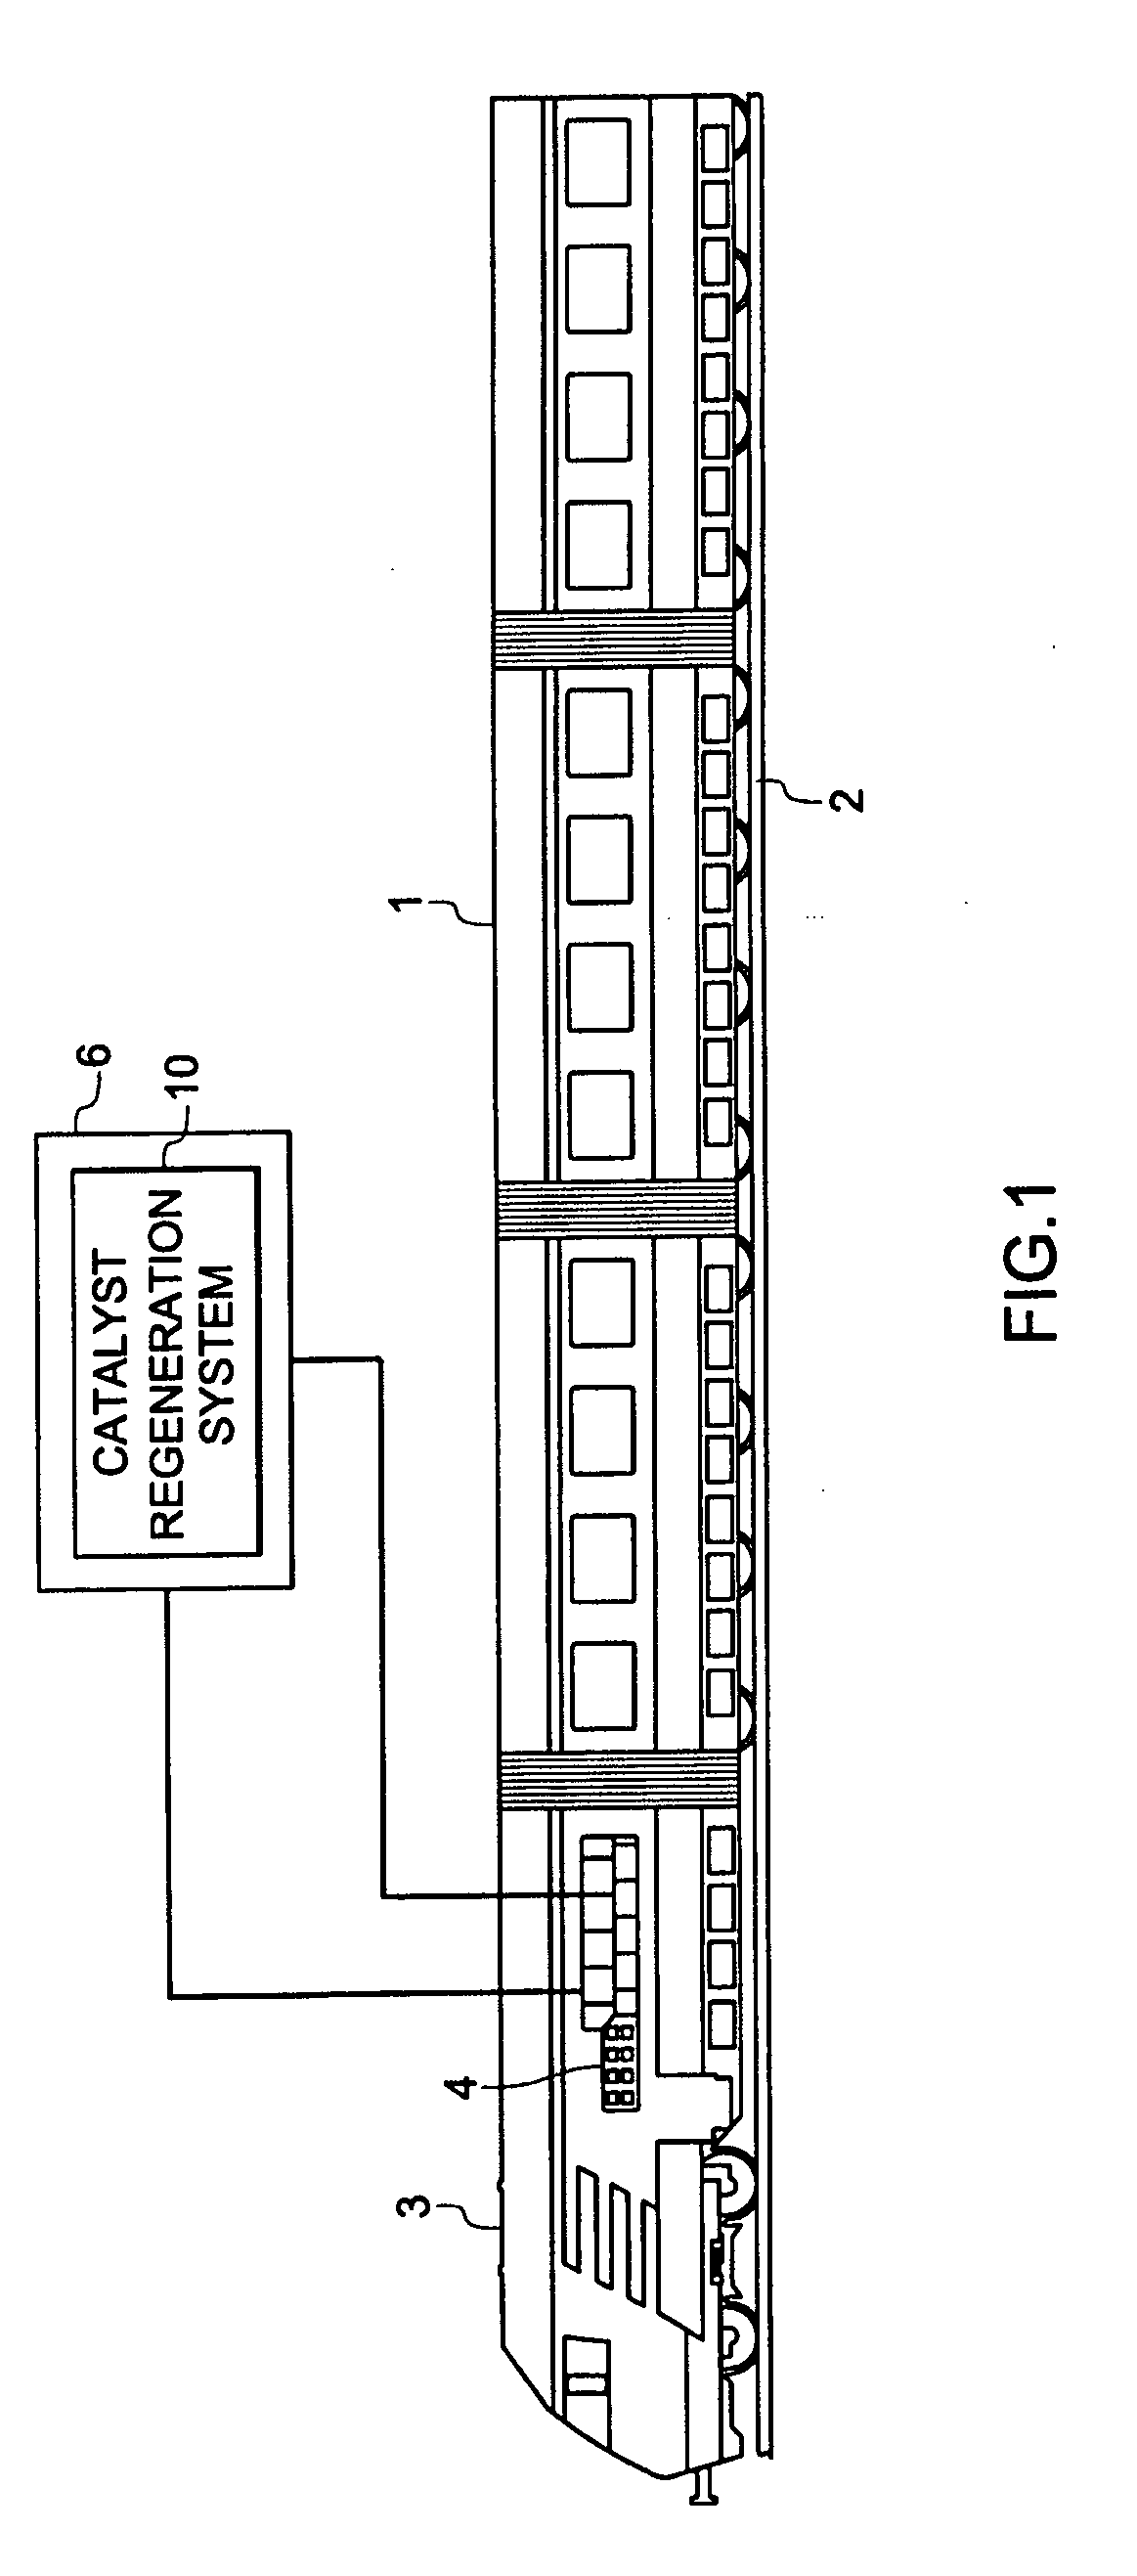 Method and system for regeneration of a catalyst